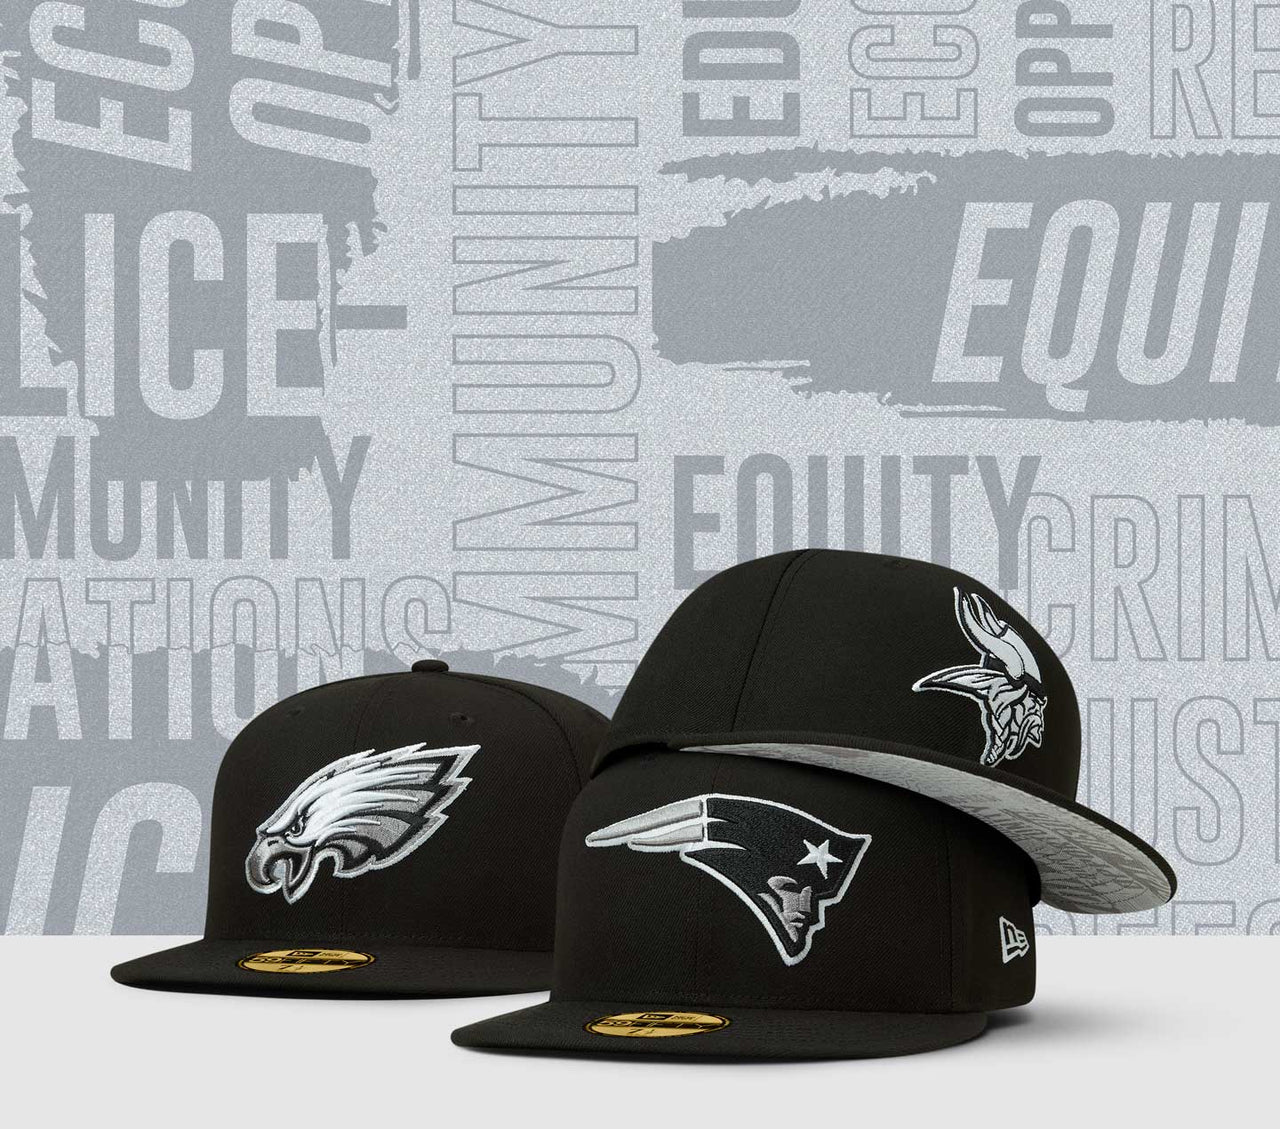 Shop the official NFL Inspire Change collection